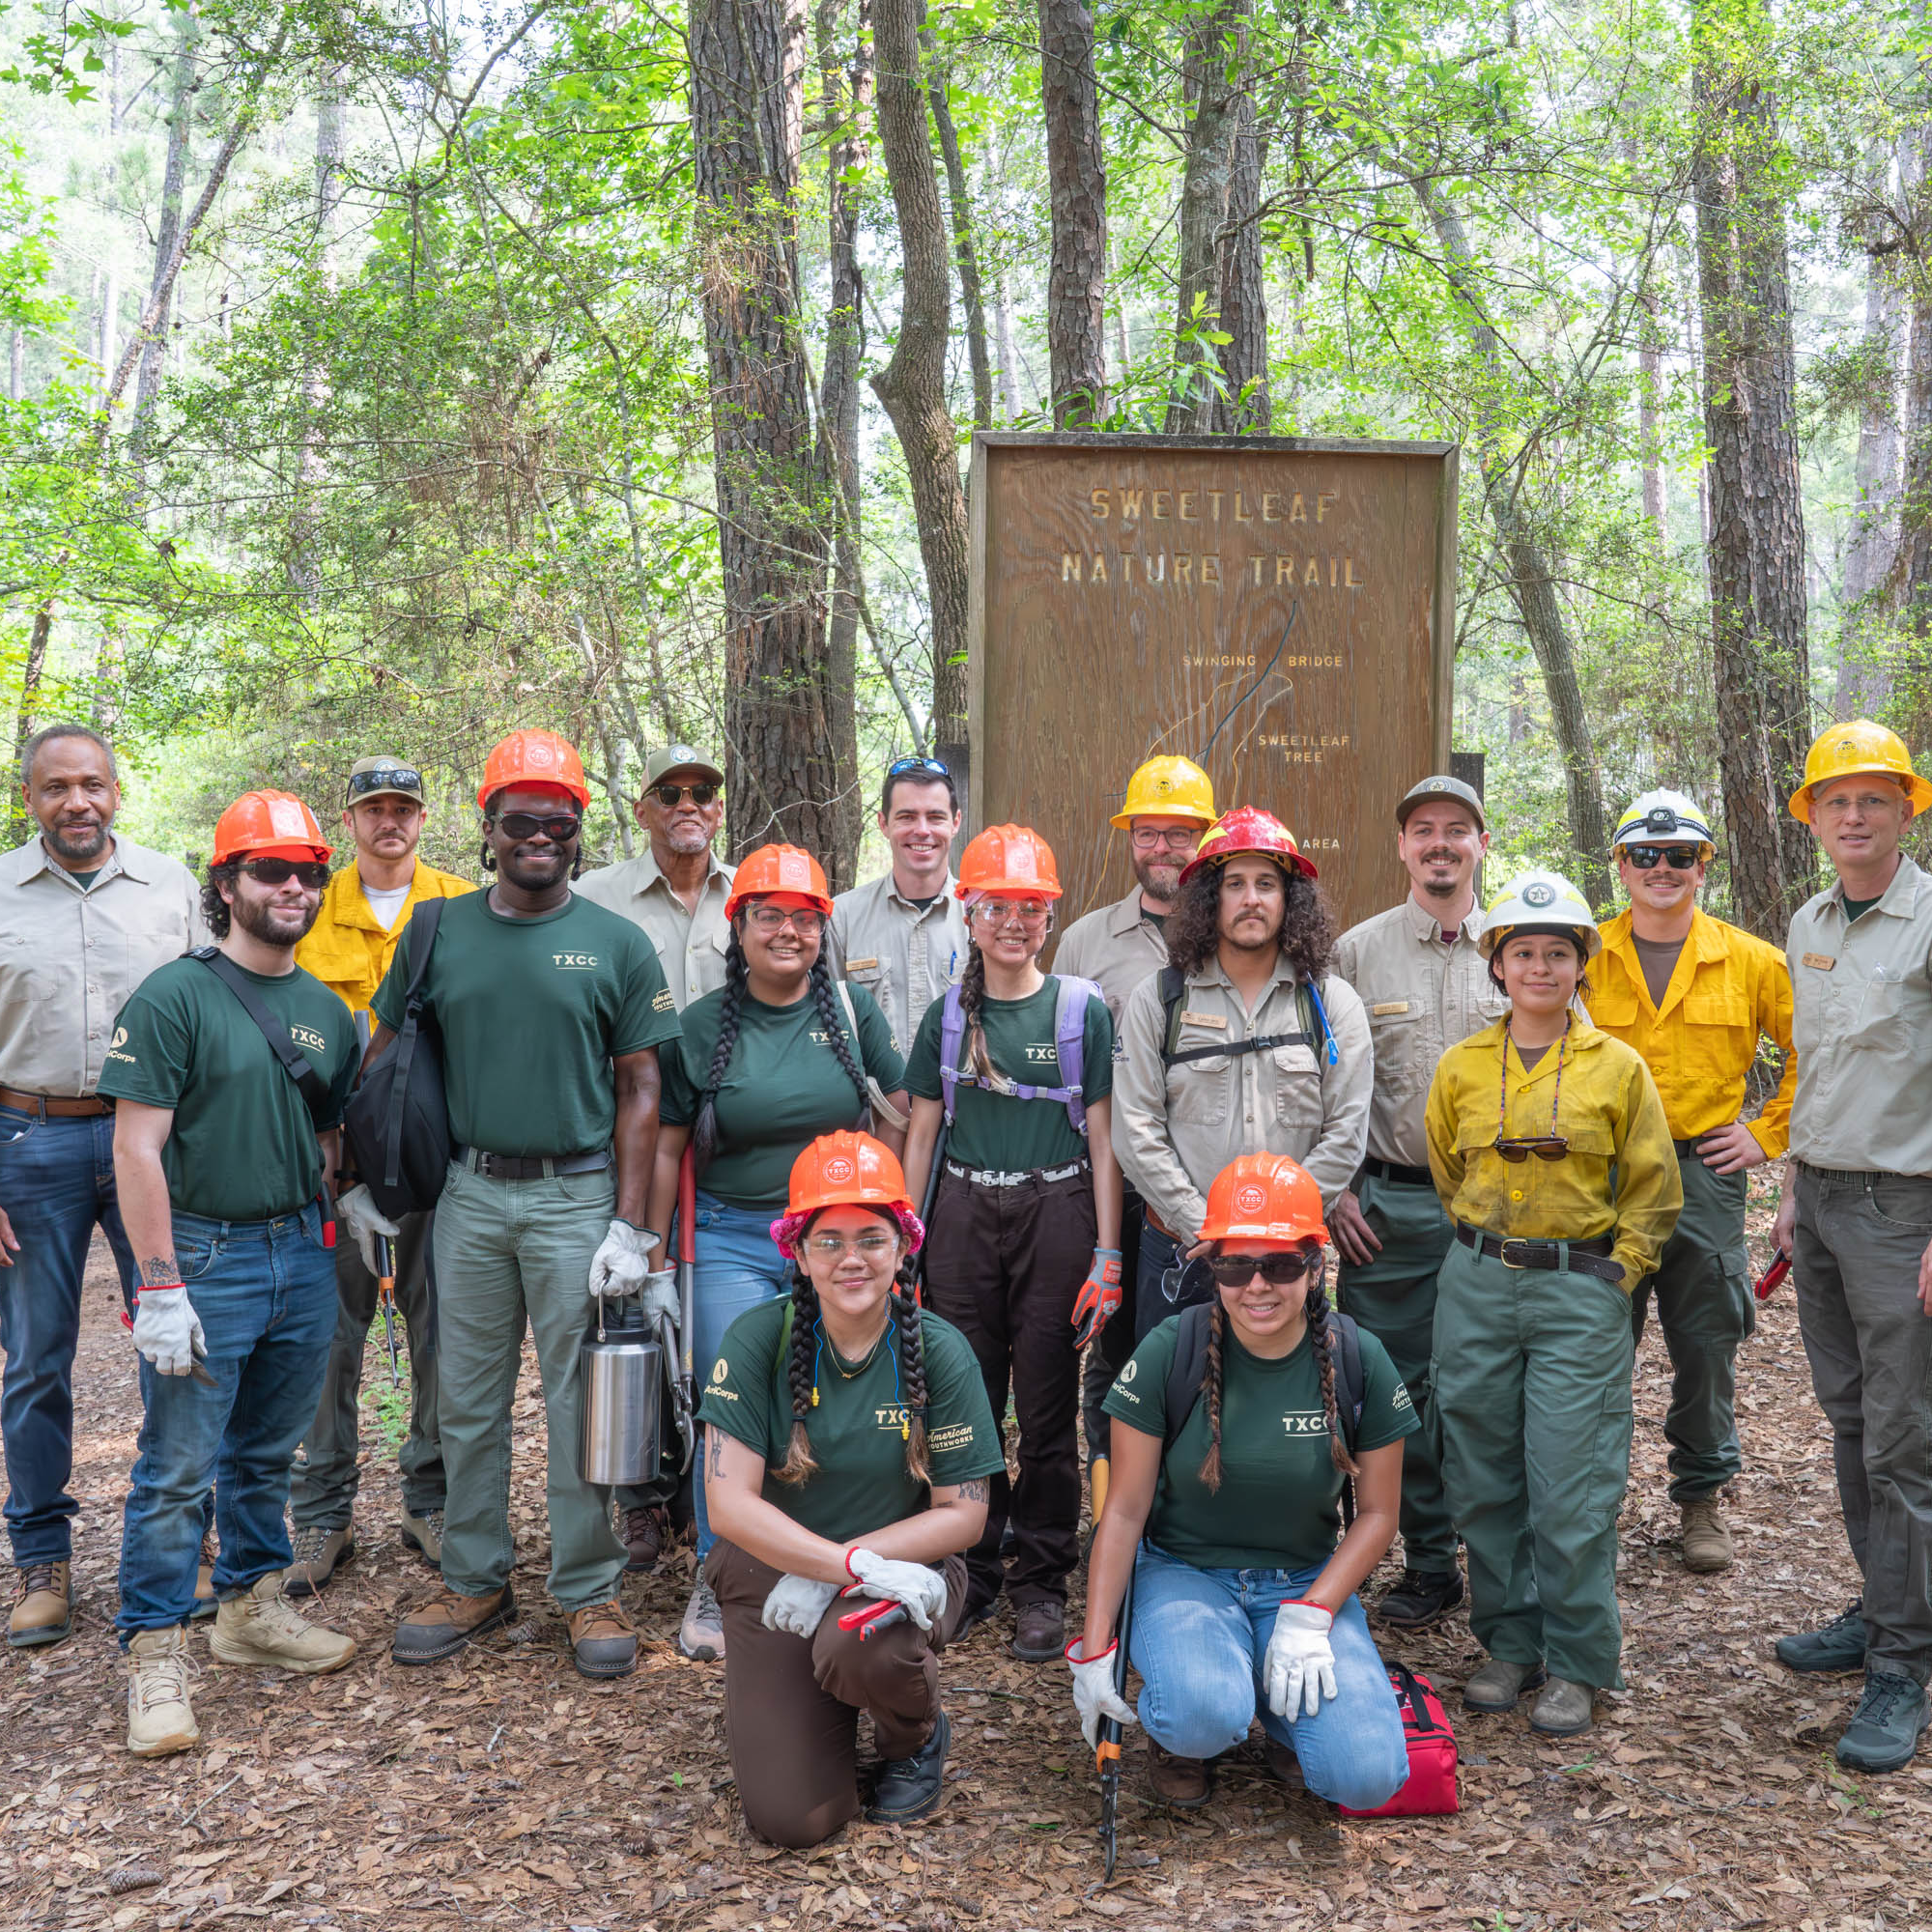 Crews from American YouthWorks helped restore parts of the W.G. Jones State Forest as part of their contribution to assist their community following last week’s damaging storms.